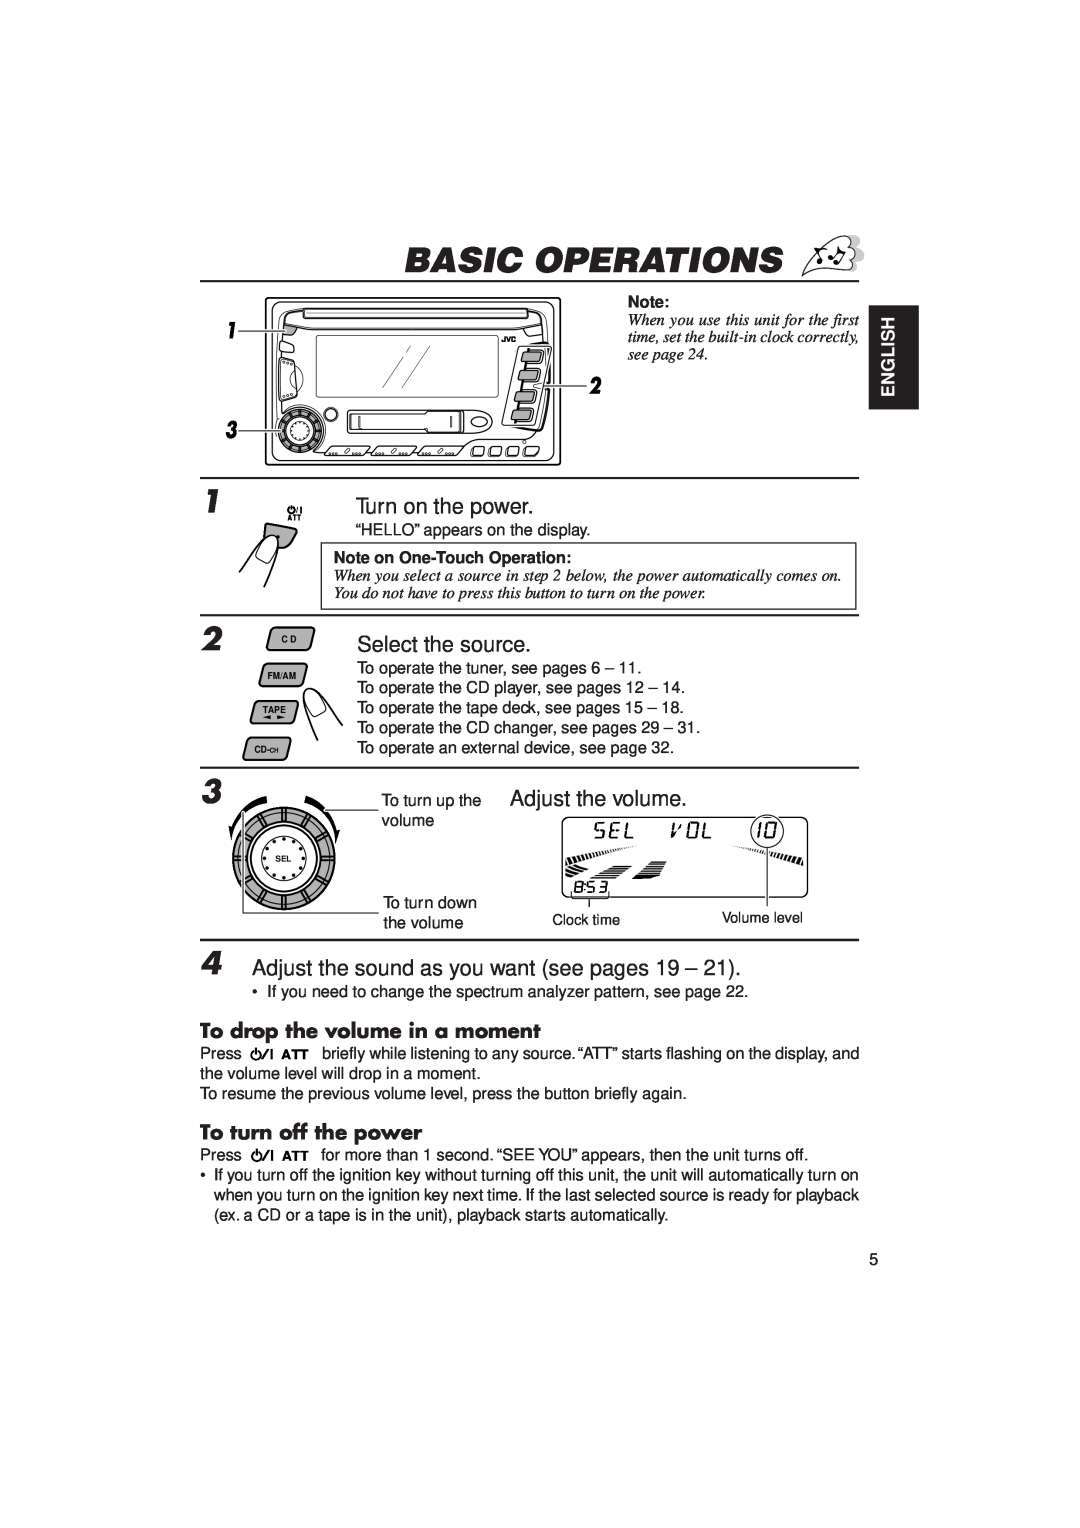 JVC KW-XC770 Basic Operations, To drop the volume in a moment, To turn off the power, English, Note on One-Touch Operation 